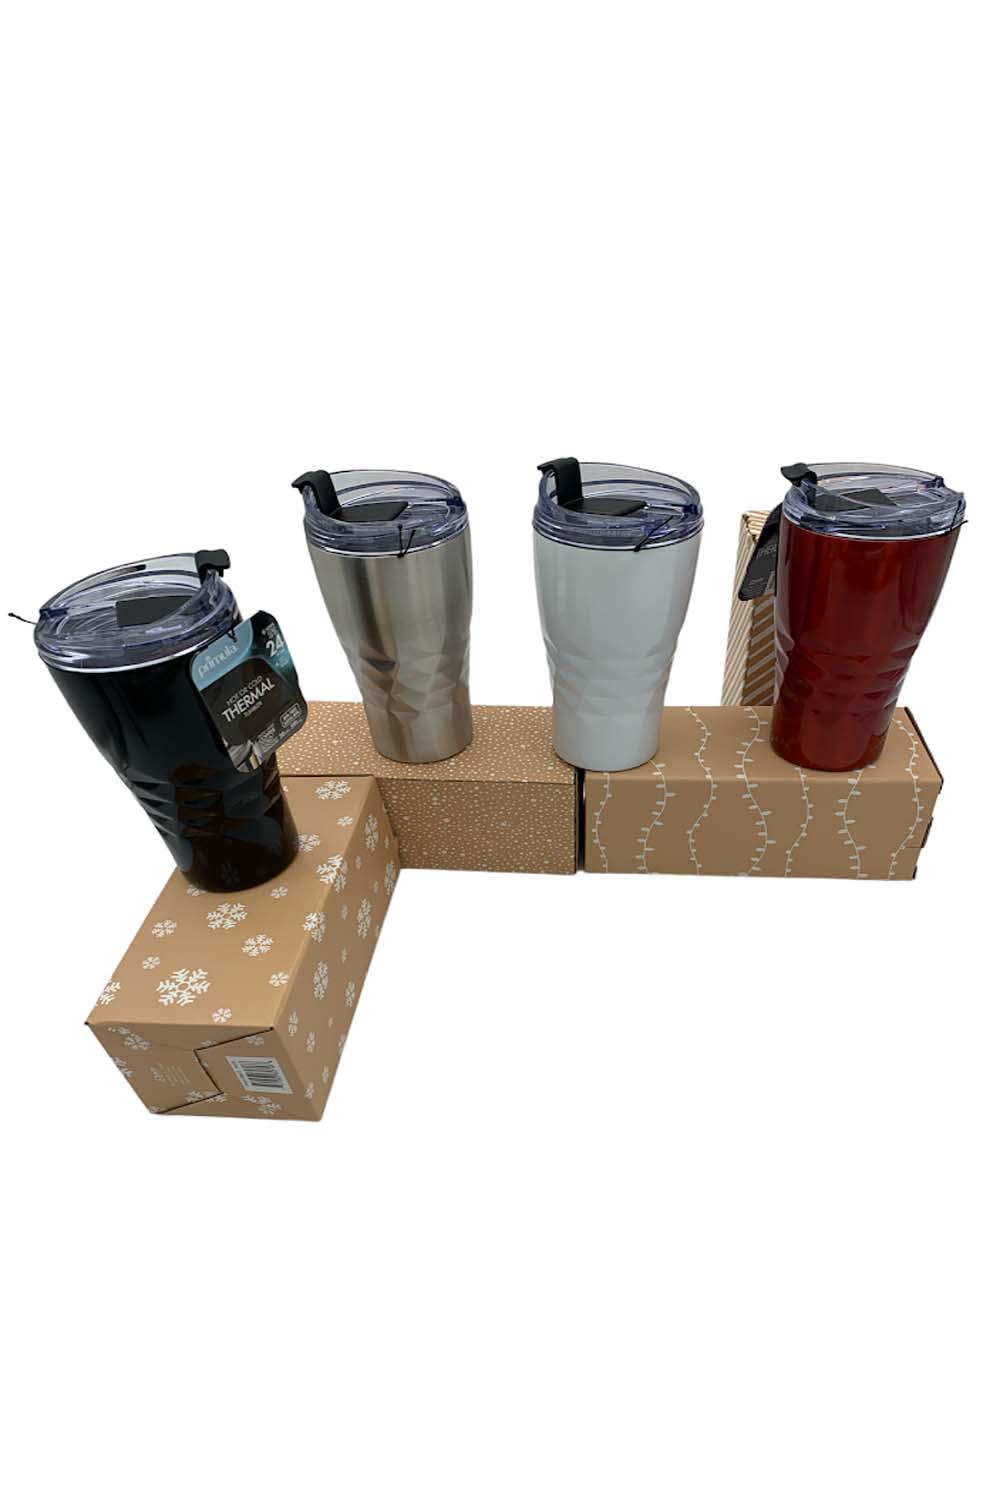 Primula Set of 4 Stainless Steel Insulated Tumblers